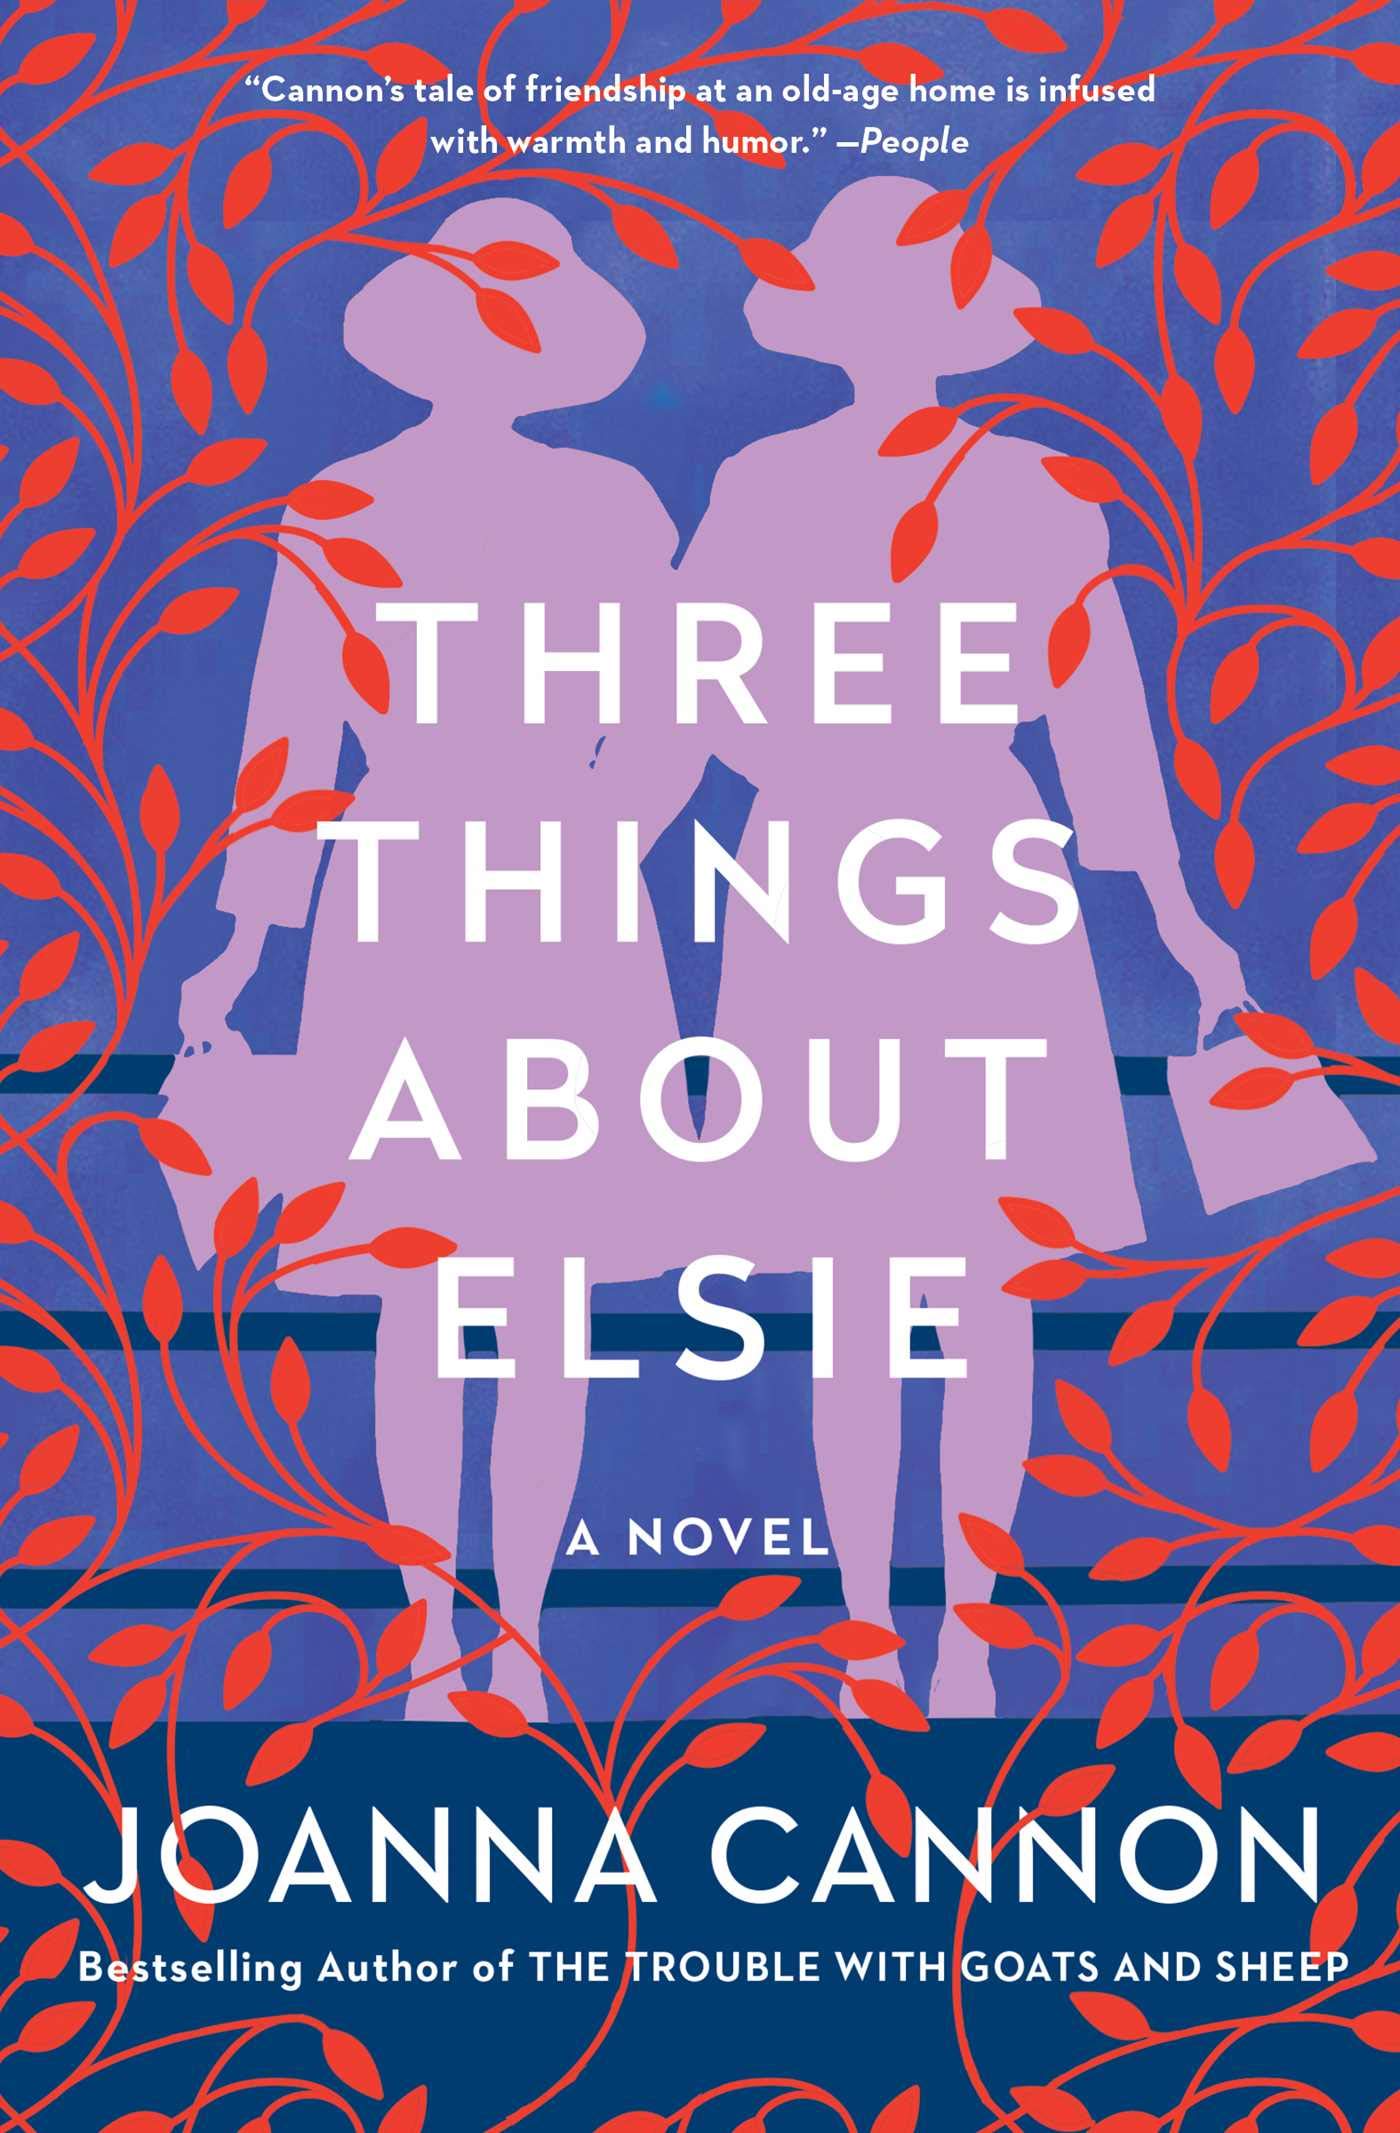 Cover of Three Things About Elise by Joanna Cannon